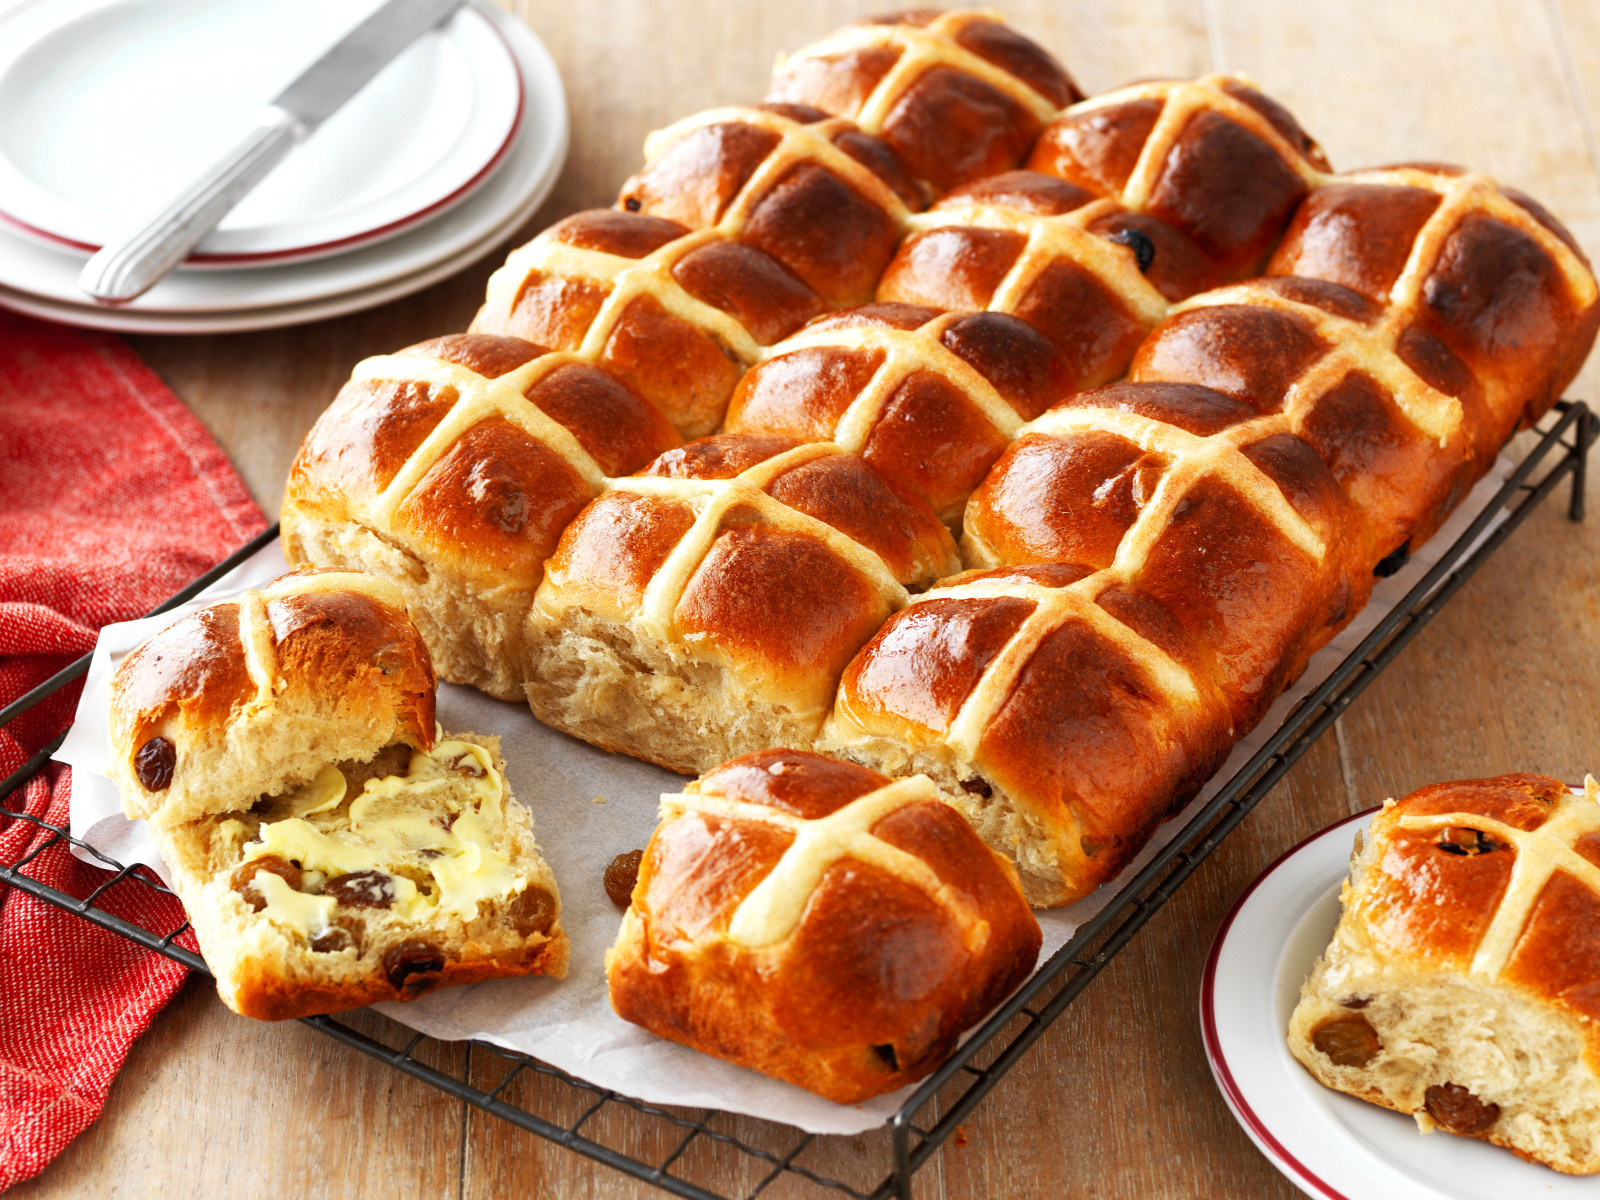 What Cake Matches Your Vibe? Hot cross buns